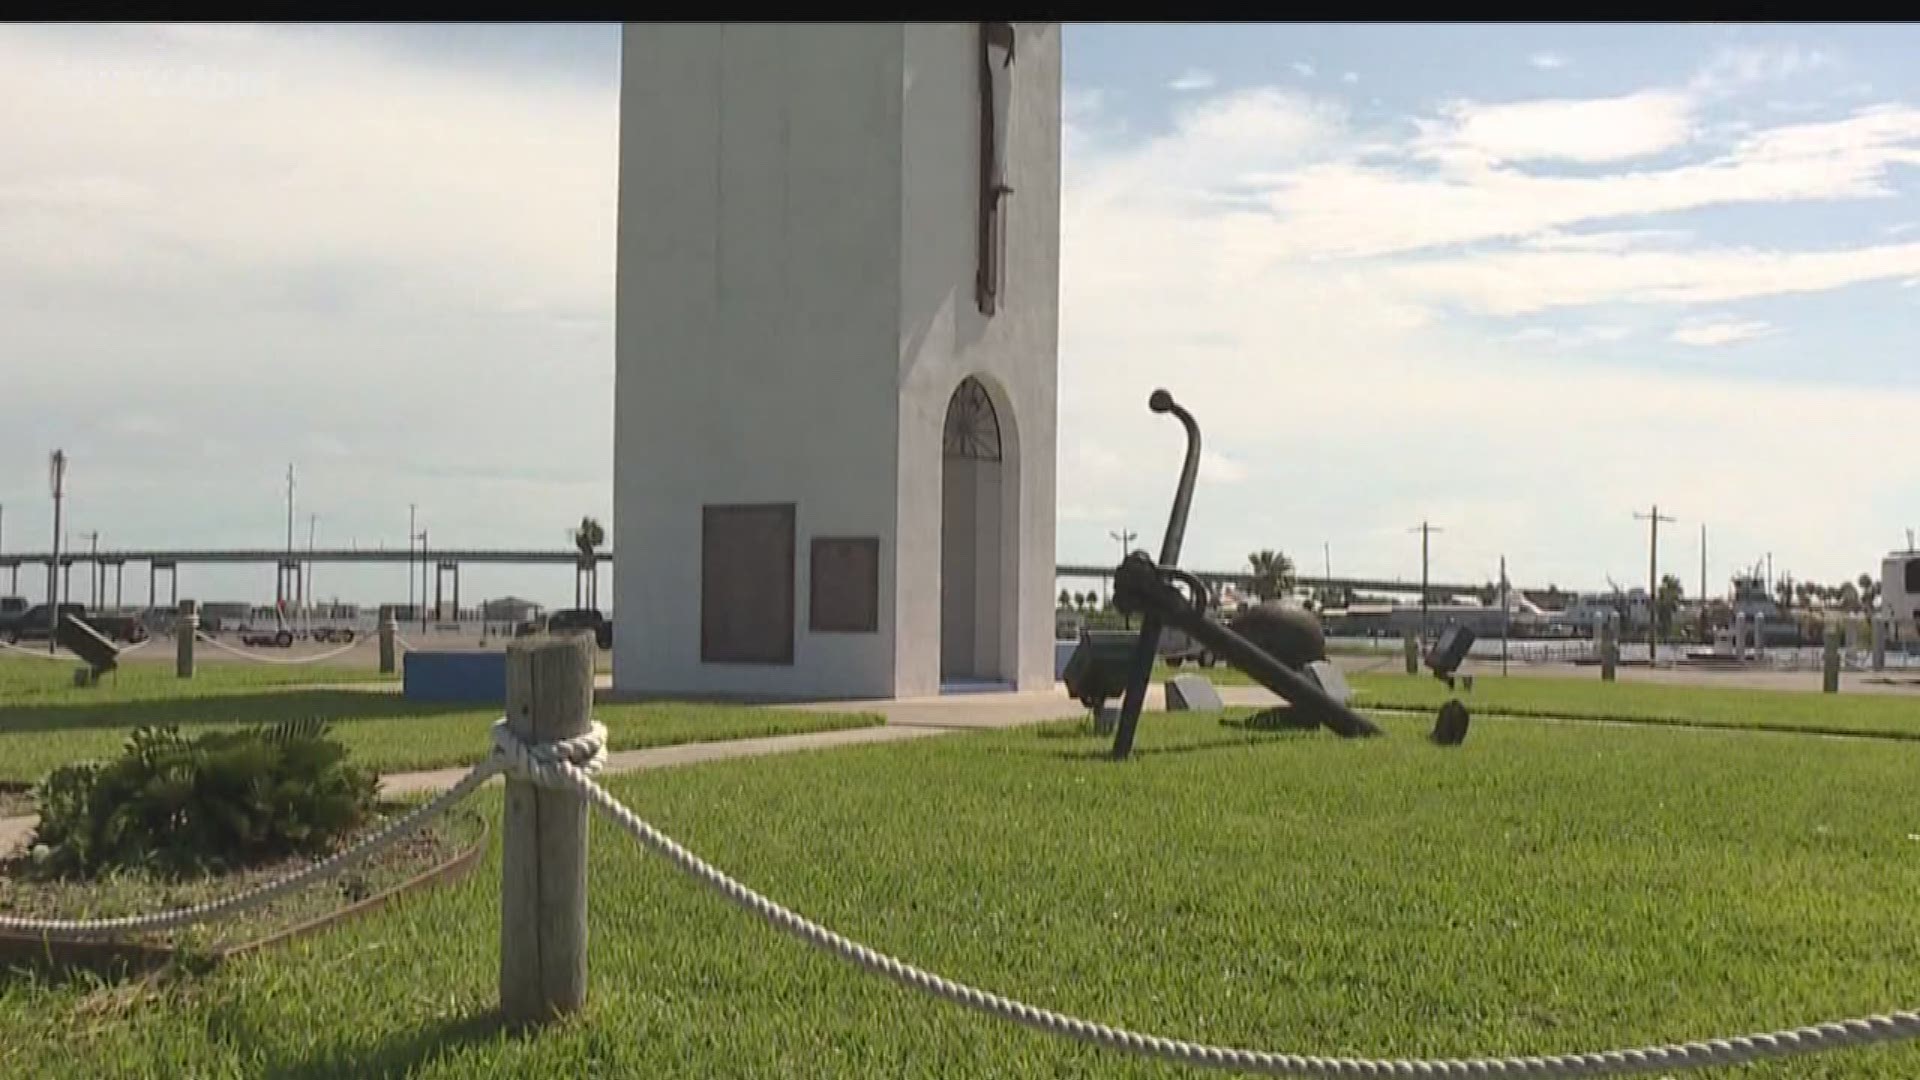 Conn Brown Harbor in Aransas Pass will see some much-needed improvements thanks to a $5 million grant the City has just been awarded.